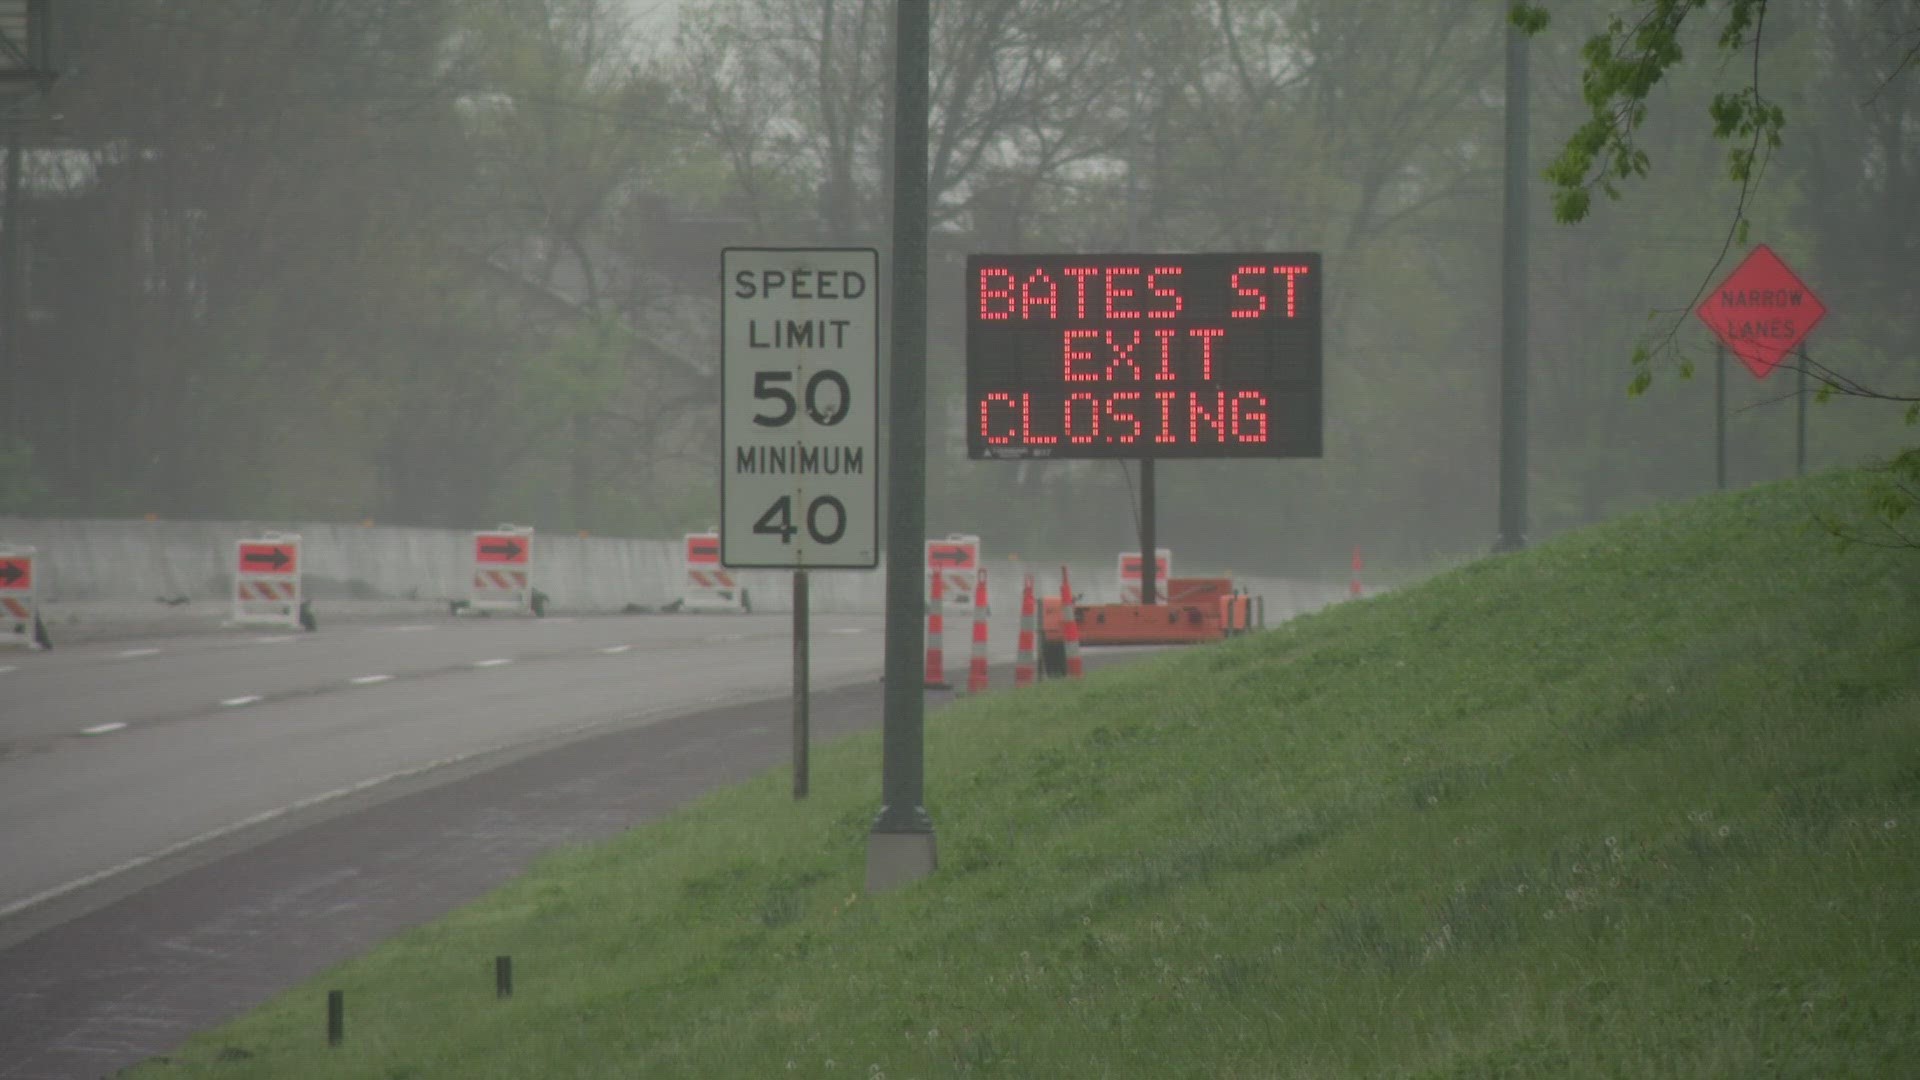 Weather postponed road construction on the southbound I-55 ramp to Bates Street until Monday morning. Drivers can use Loughborough to get around the closure.